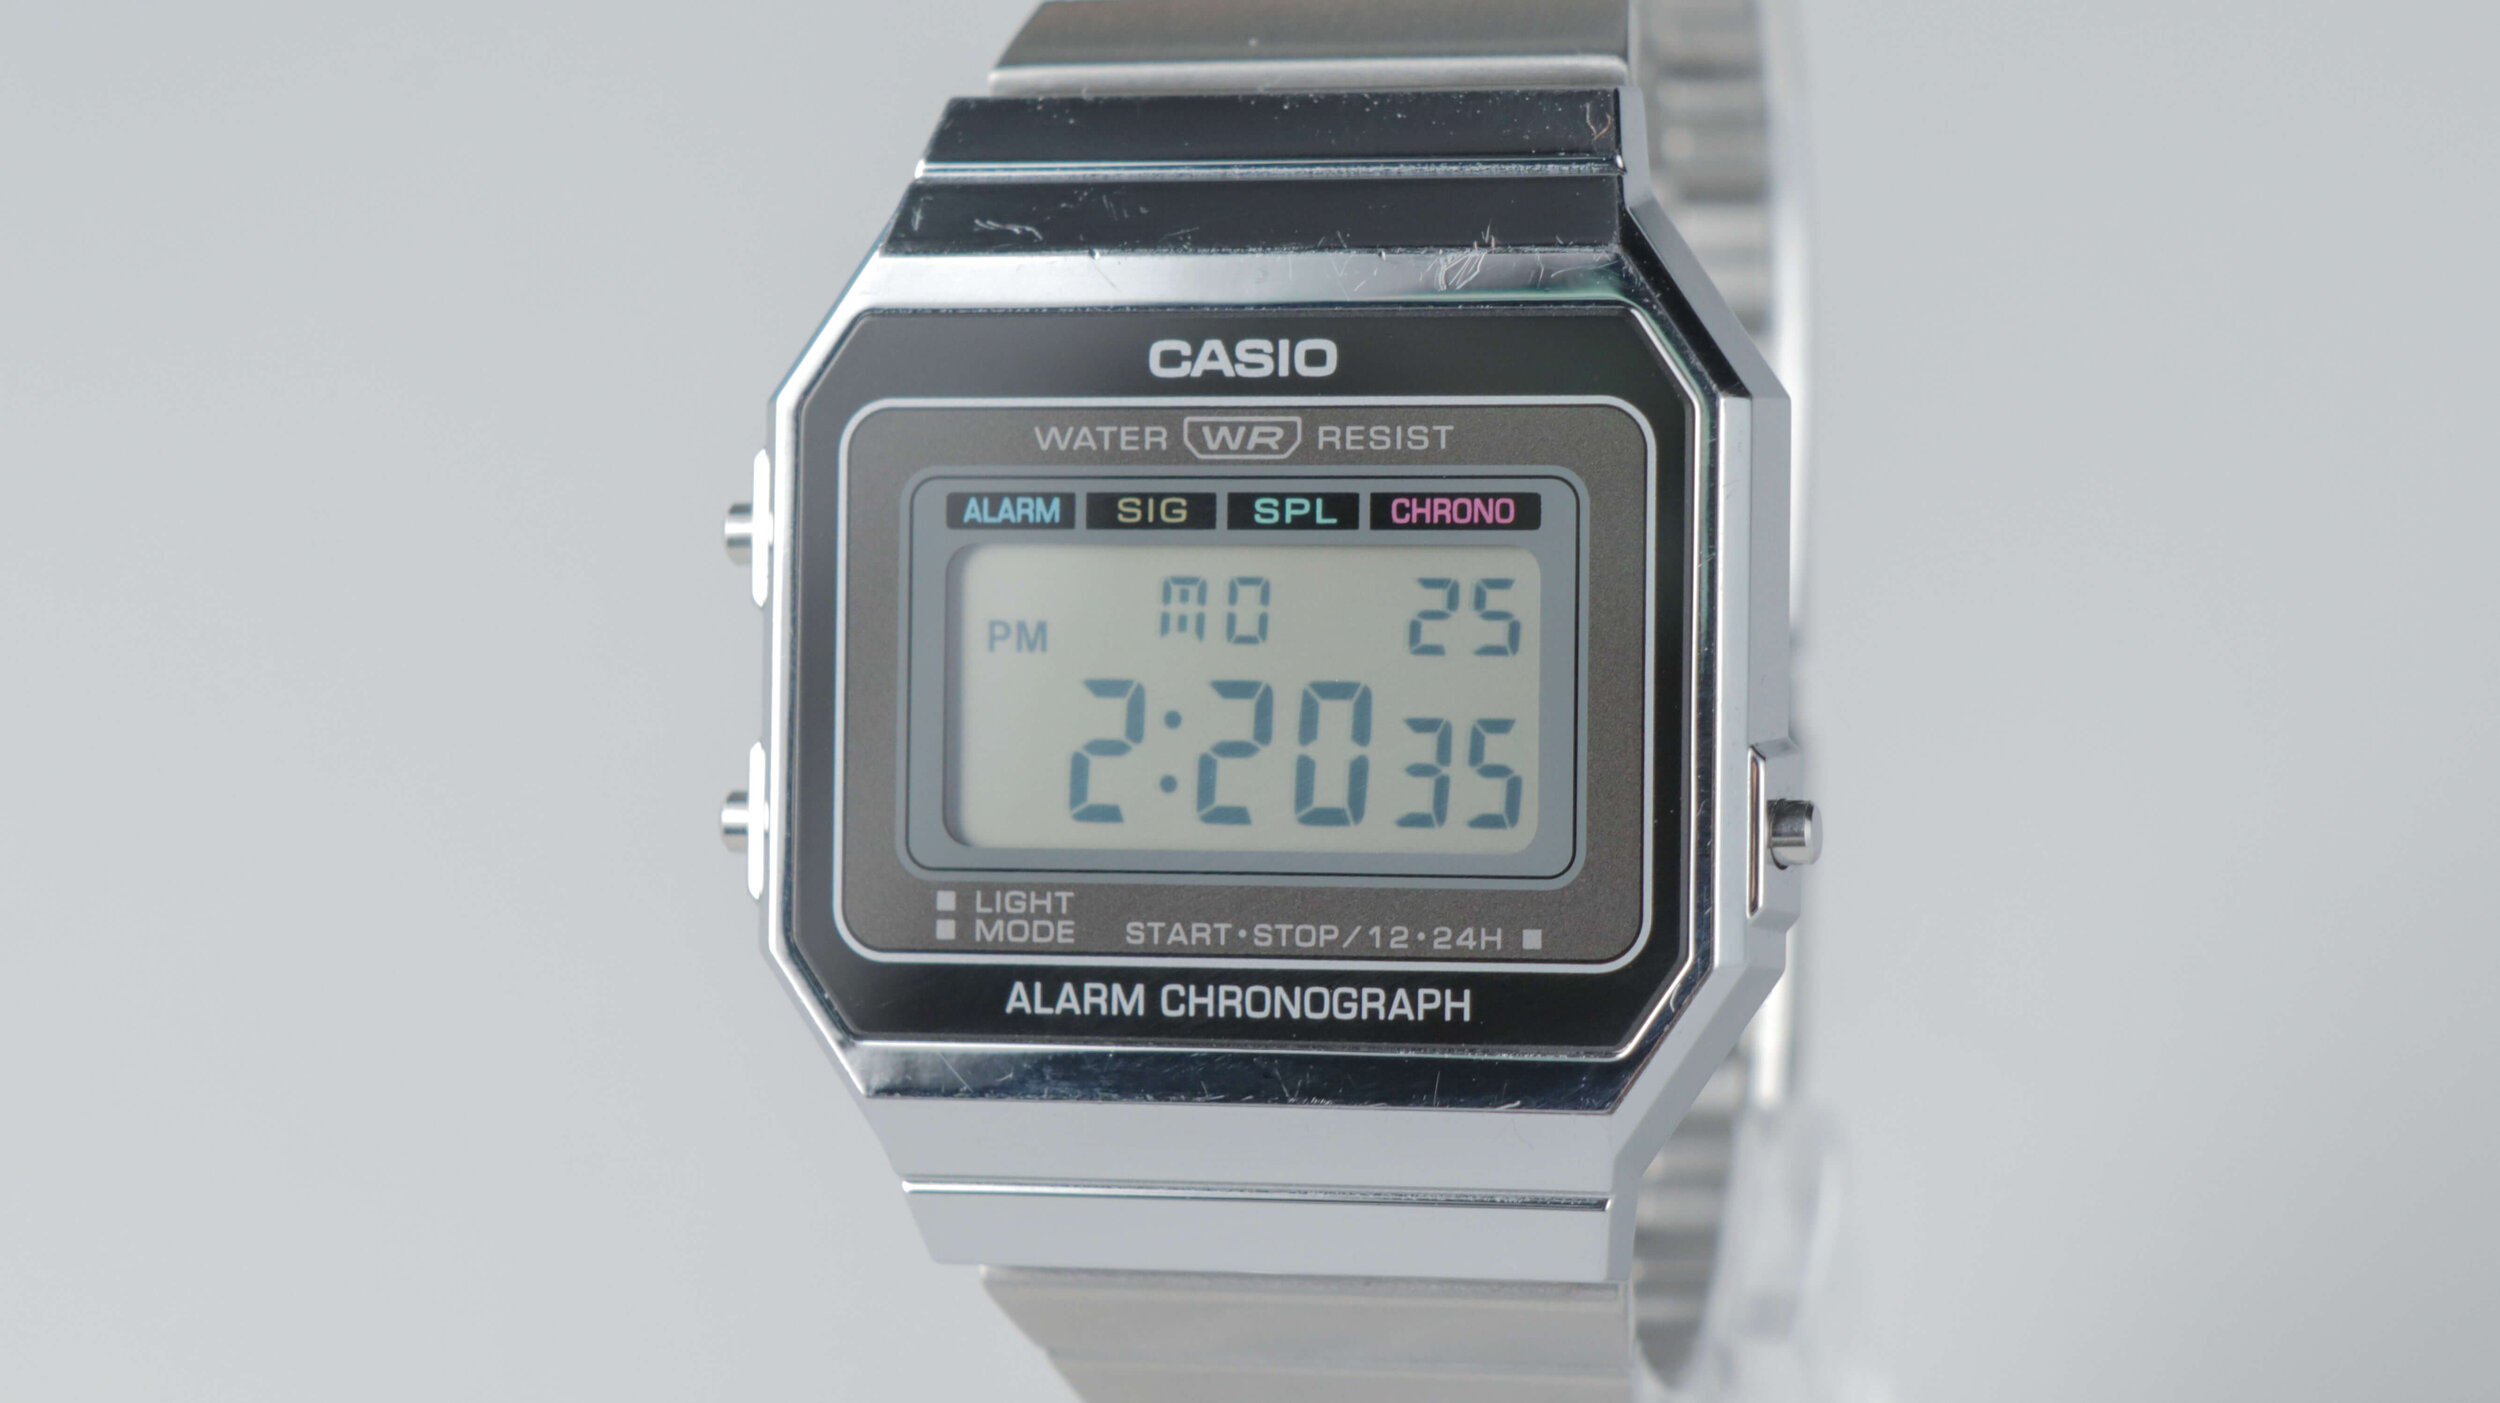 Top 20 Casio Watches Of All Time – The Ultimate List of Affordable Watches — Ben's Club